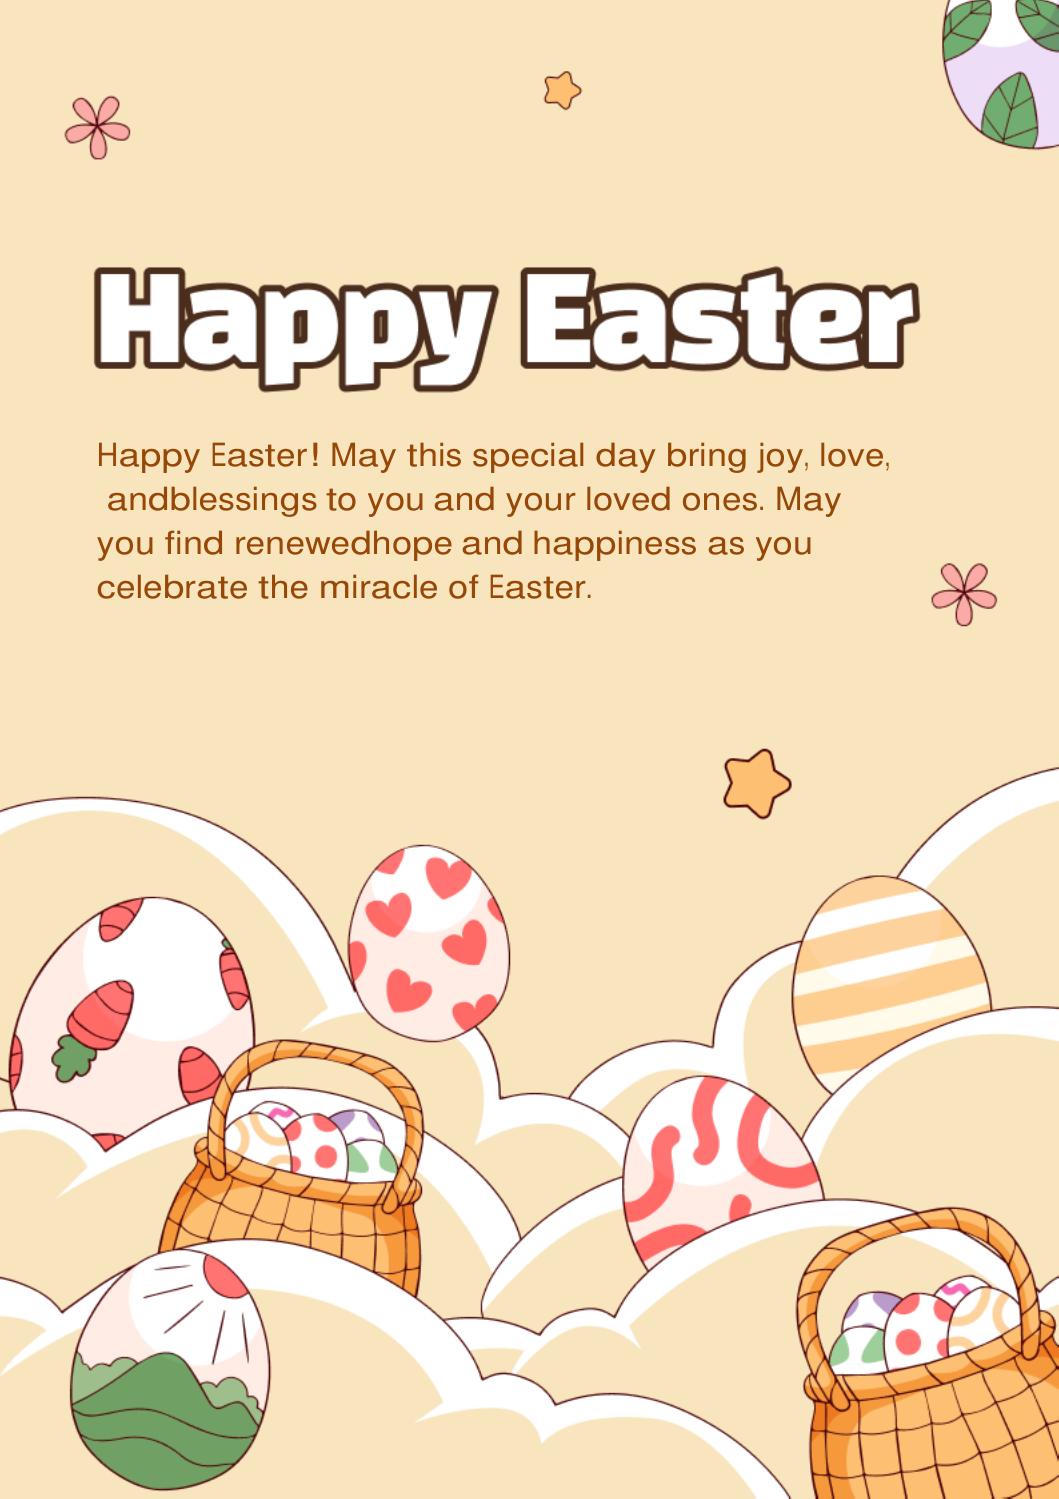 Easter wishes for family and friends